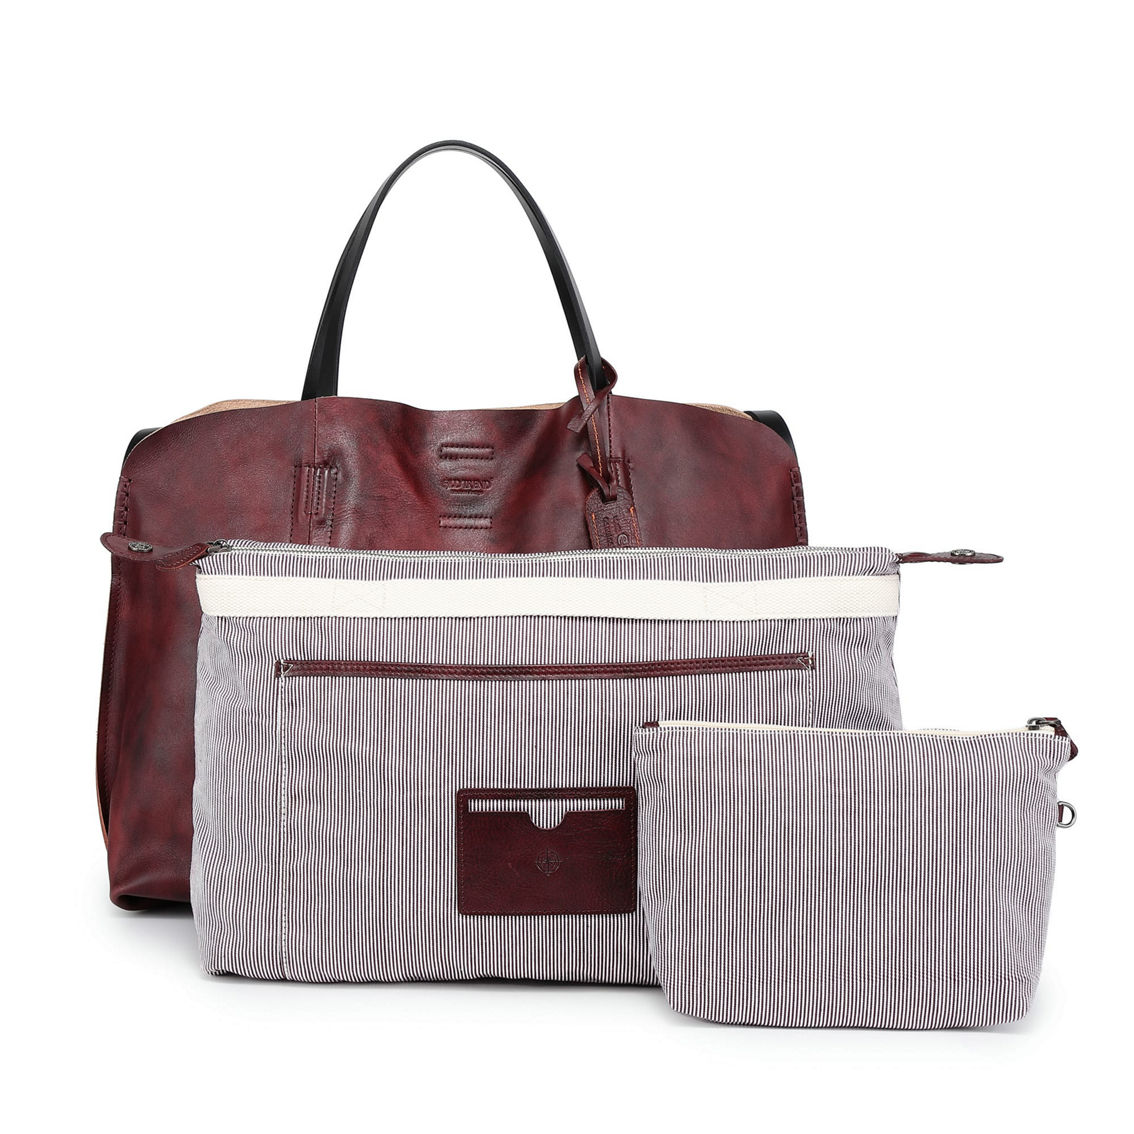 Old Trend Forest Island Leather Tote - Image 5 of 5